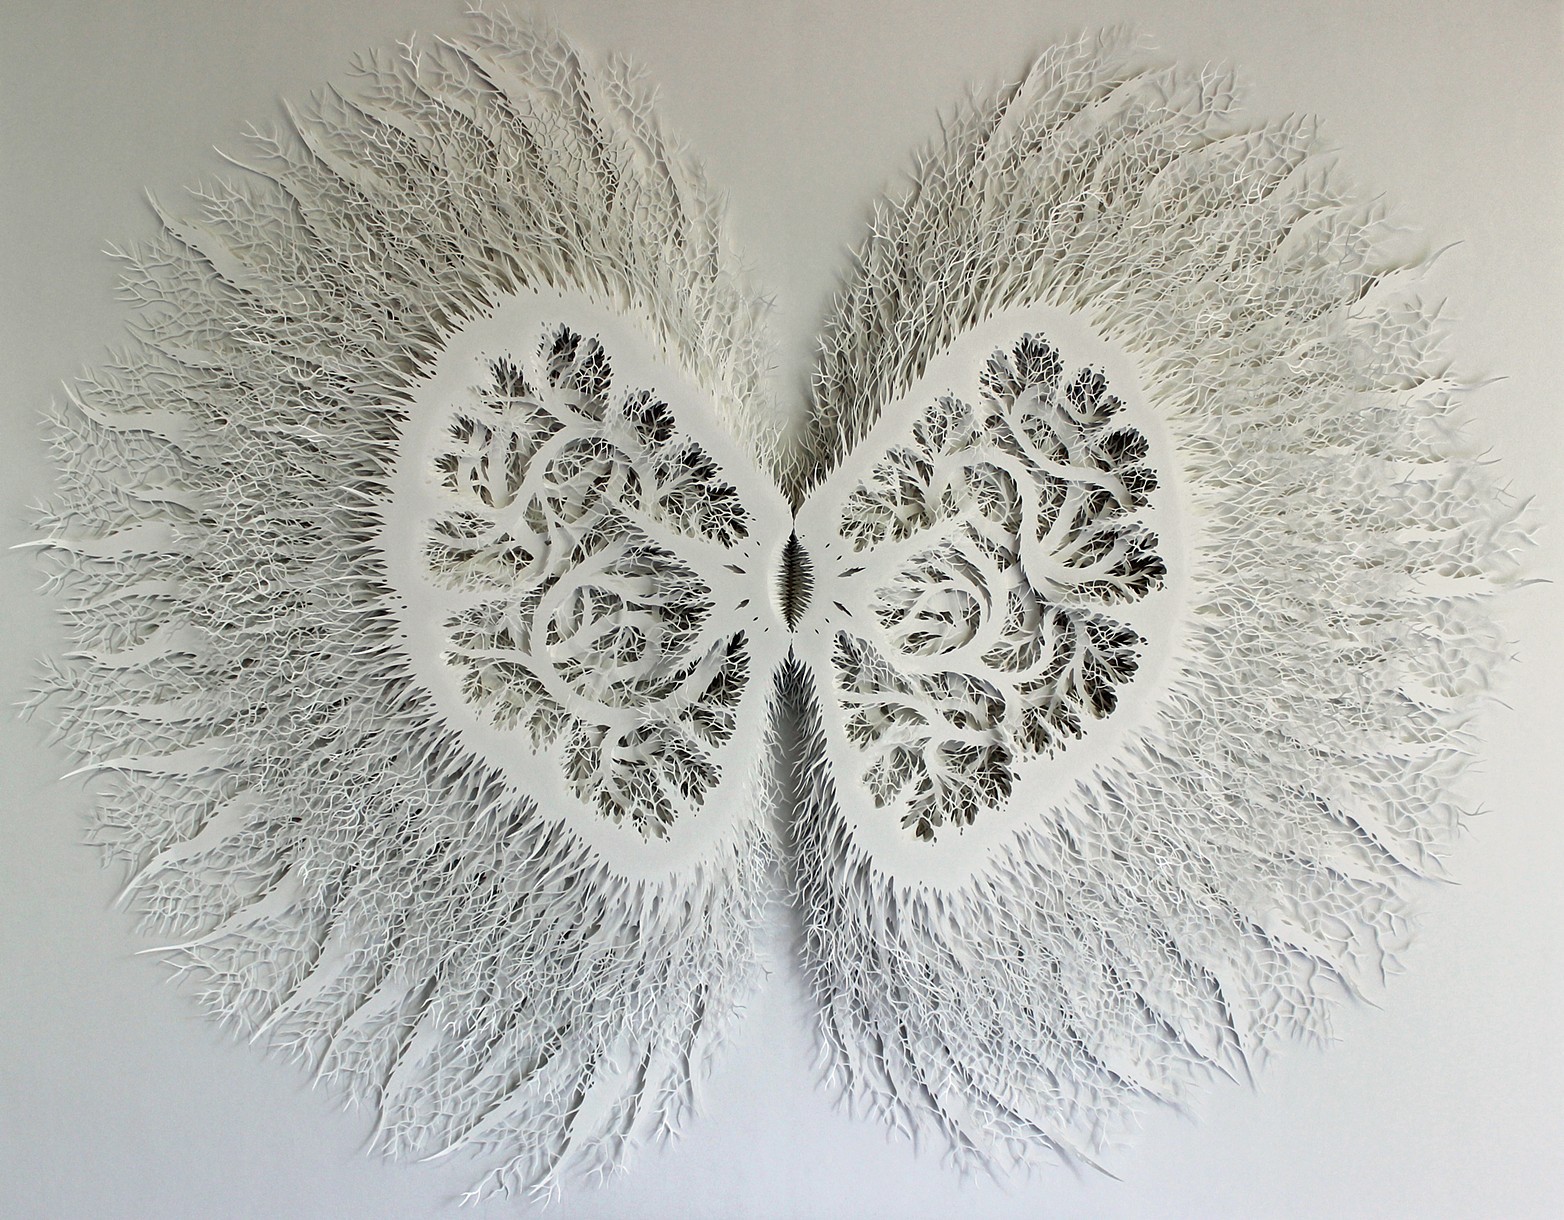 Hand cut layered paper relief sculpture